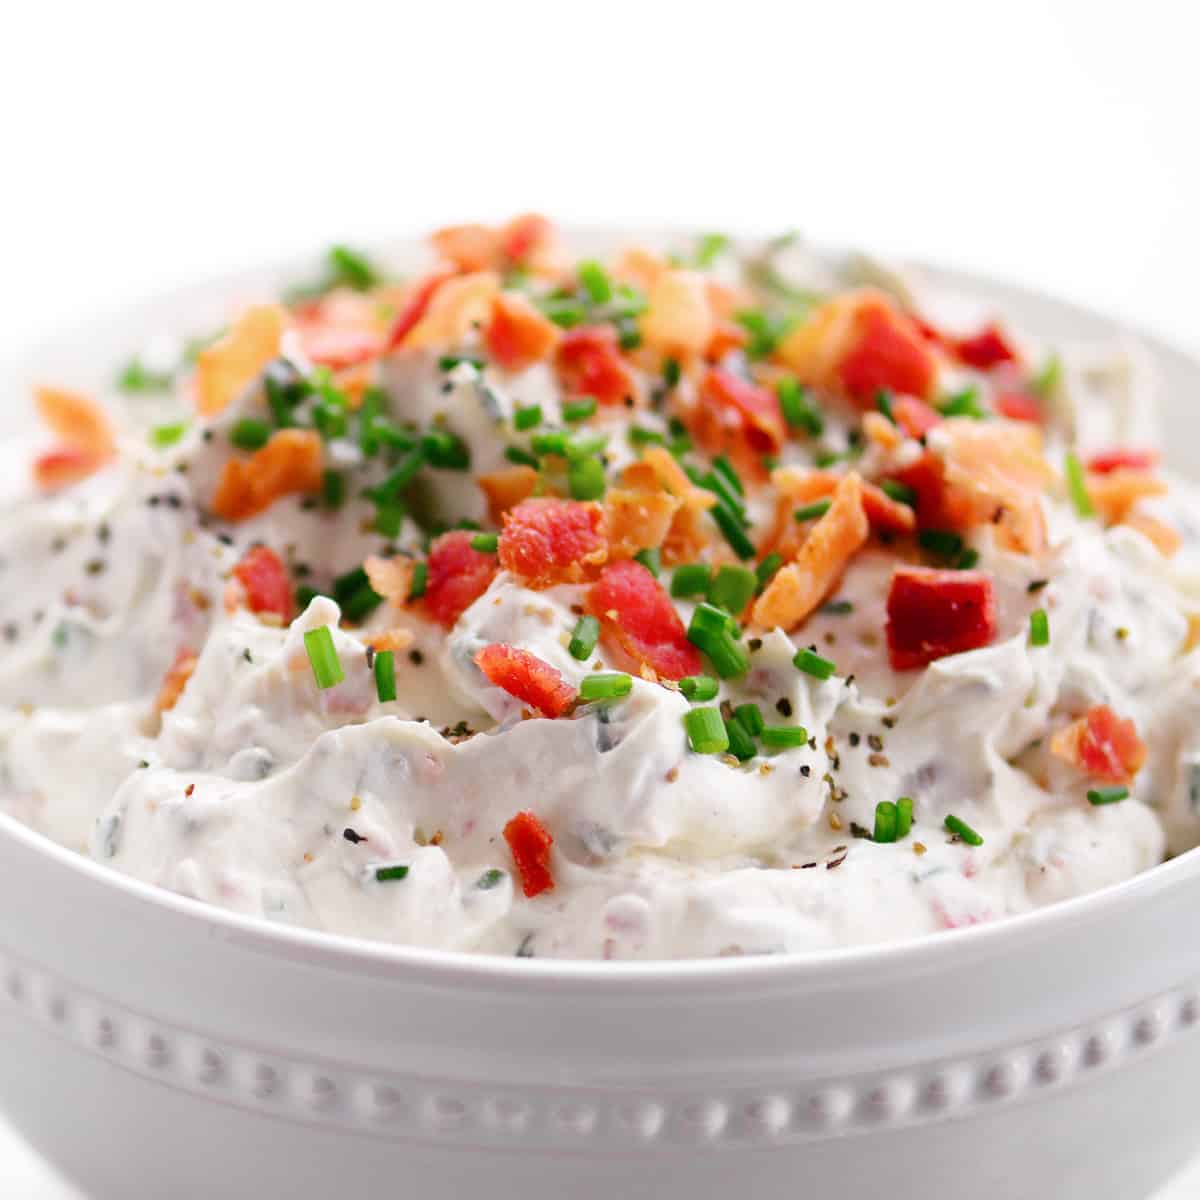 Loaded baked potato dip in a white bowl.